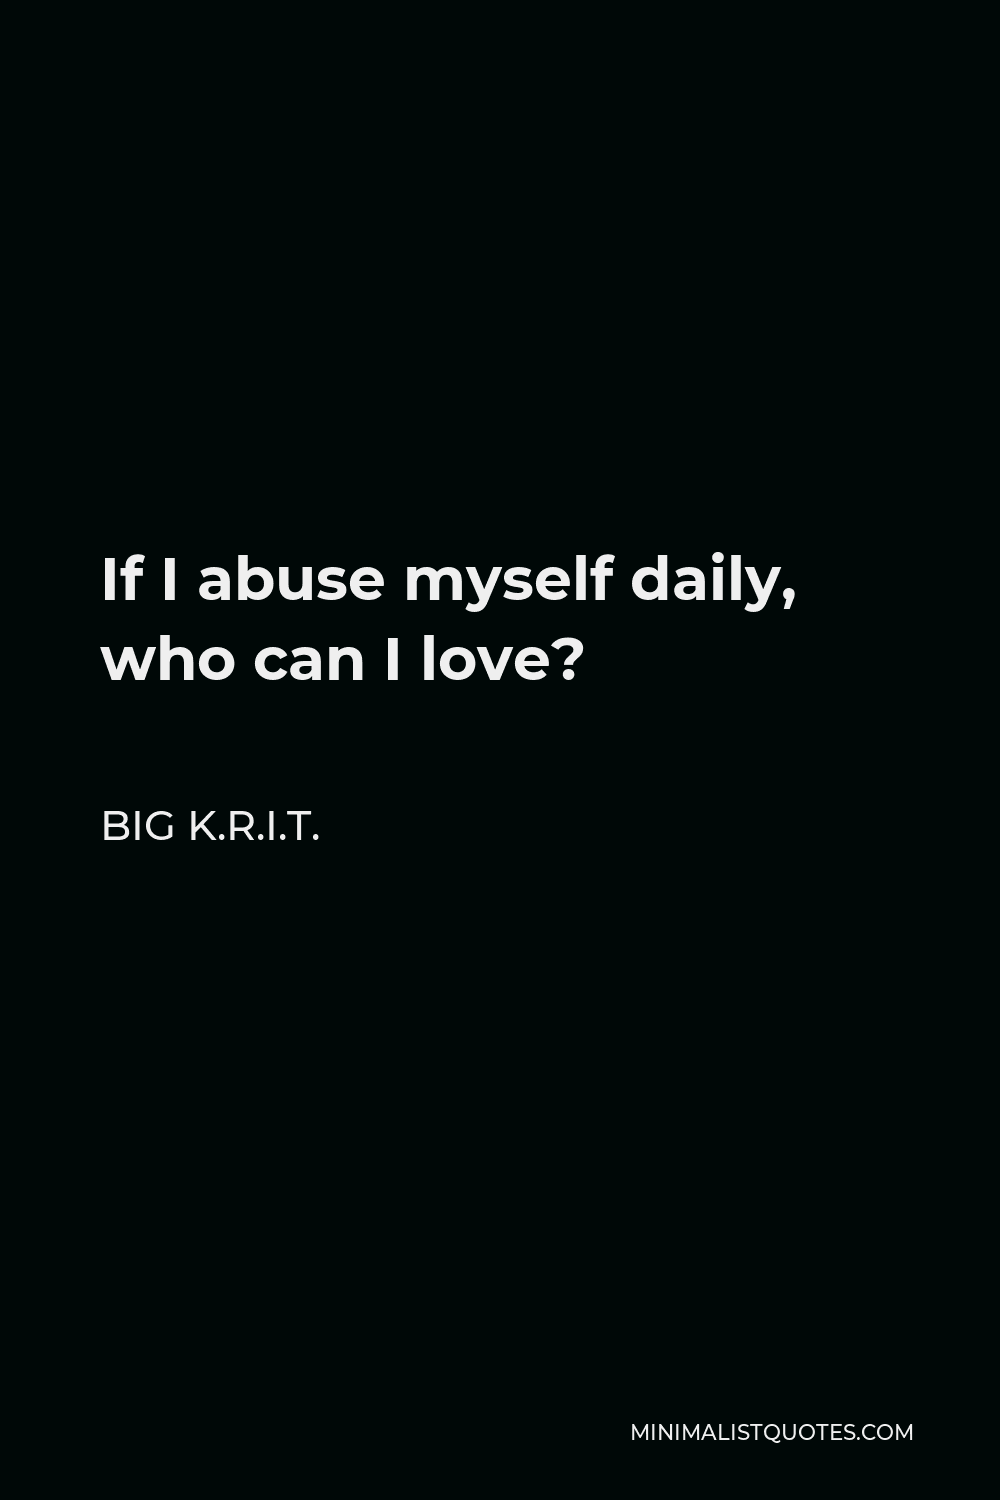 Big K.R.I.T. Quote - If I abuse myself daily, who can I love?